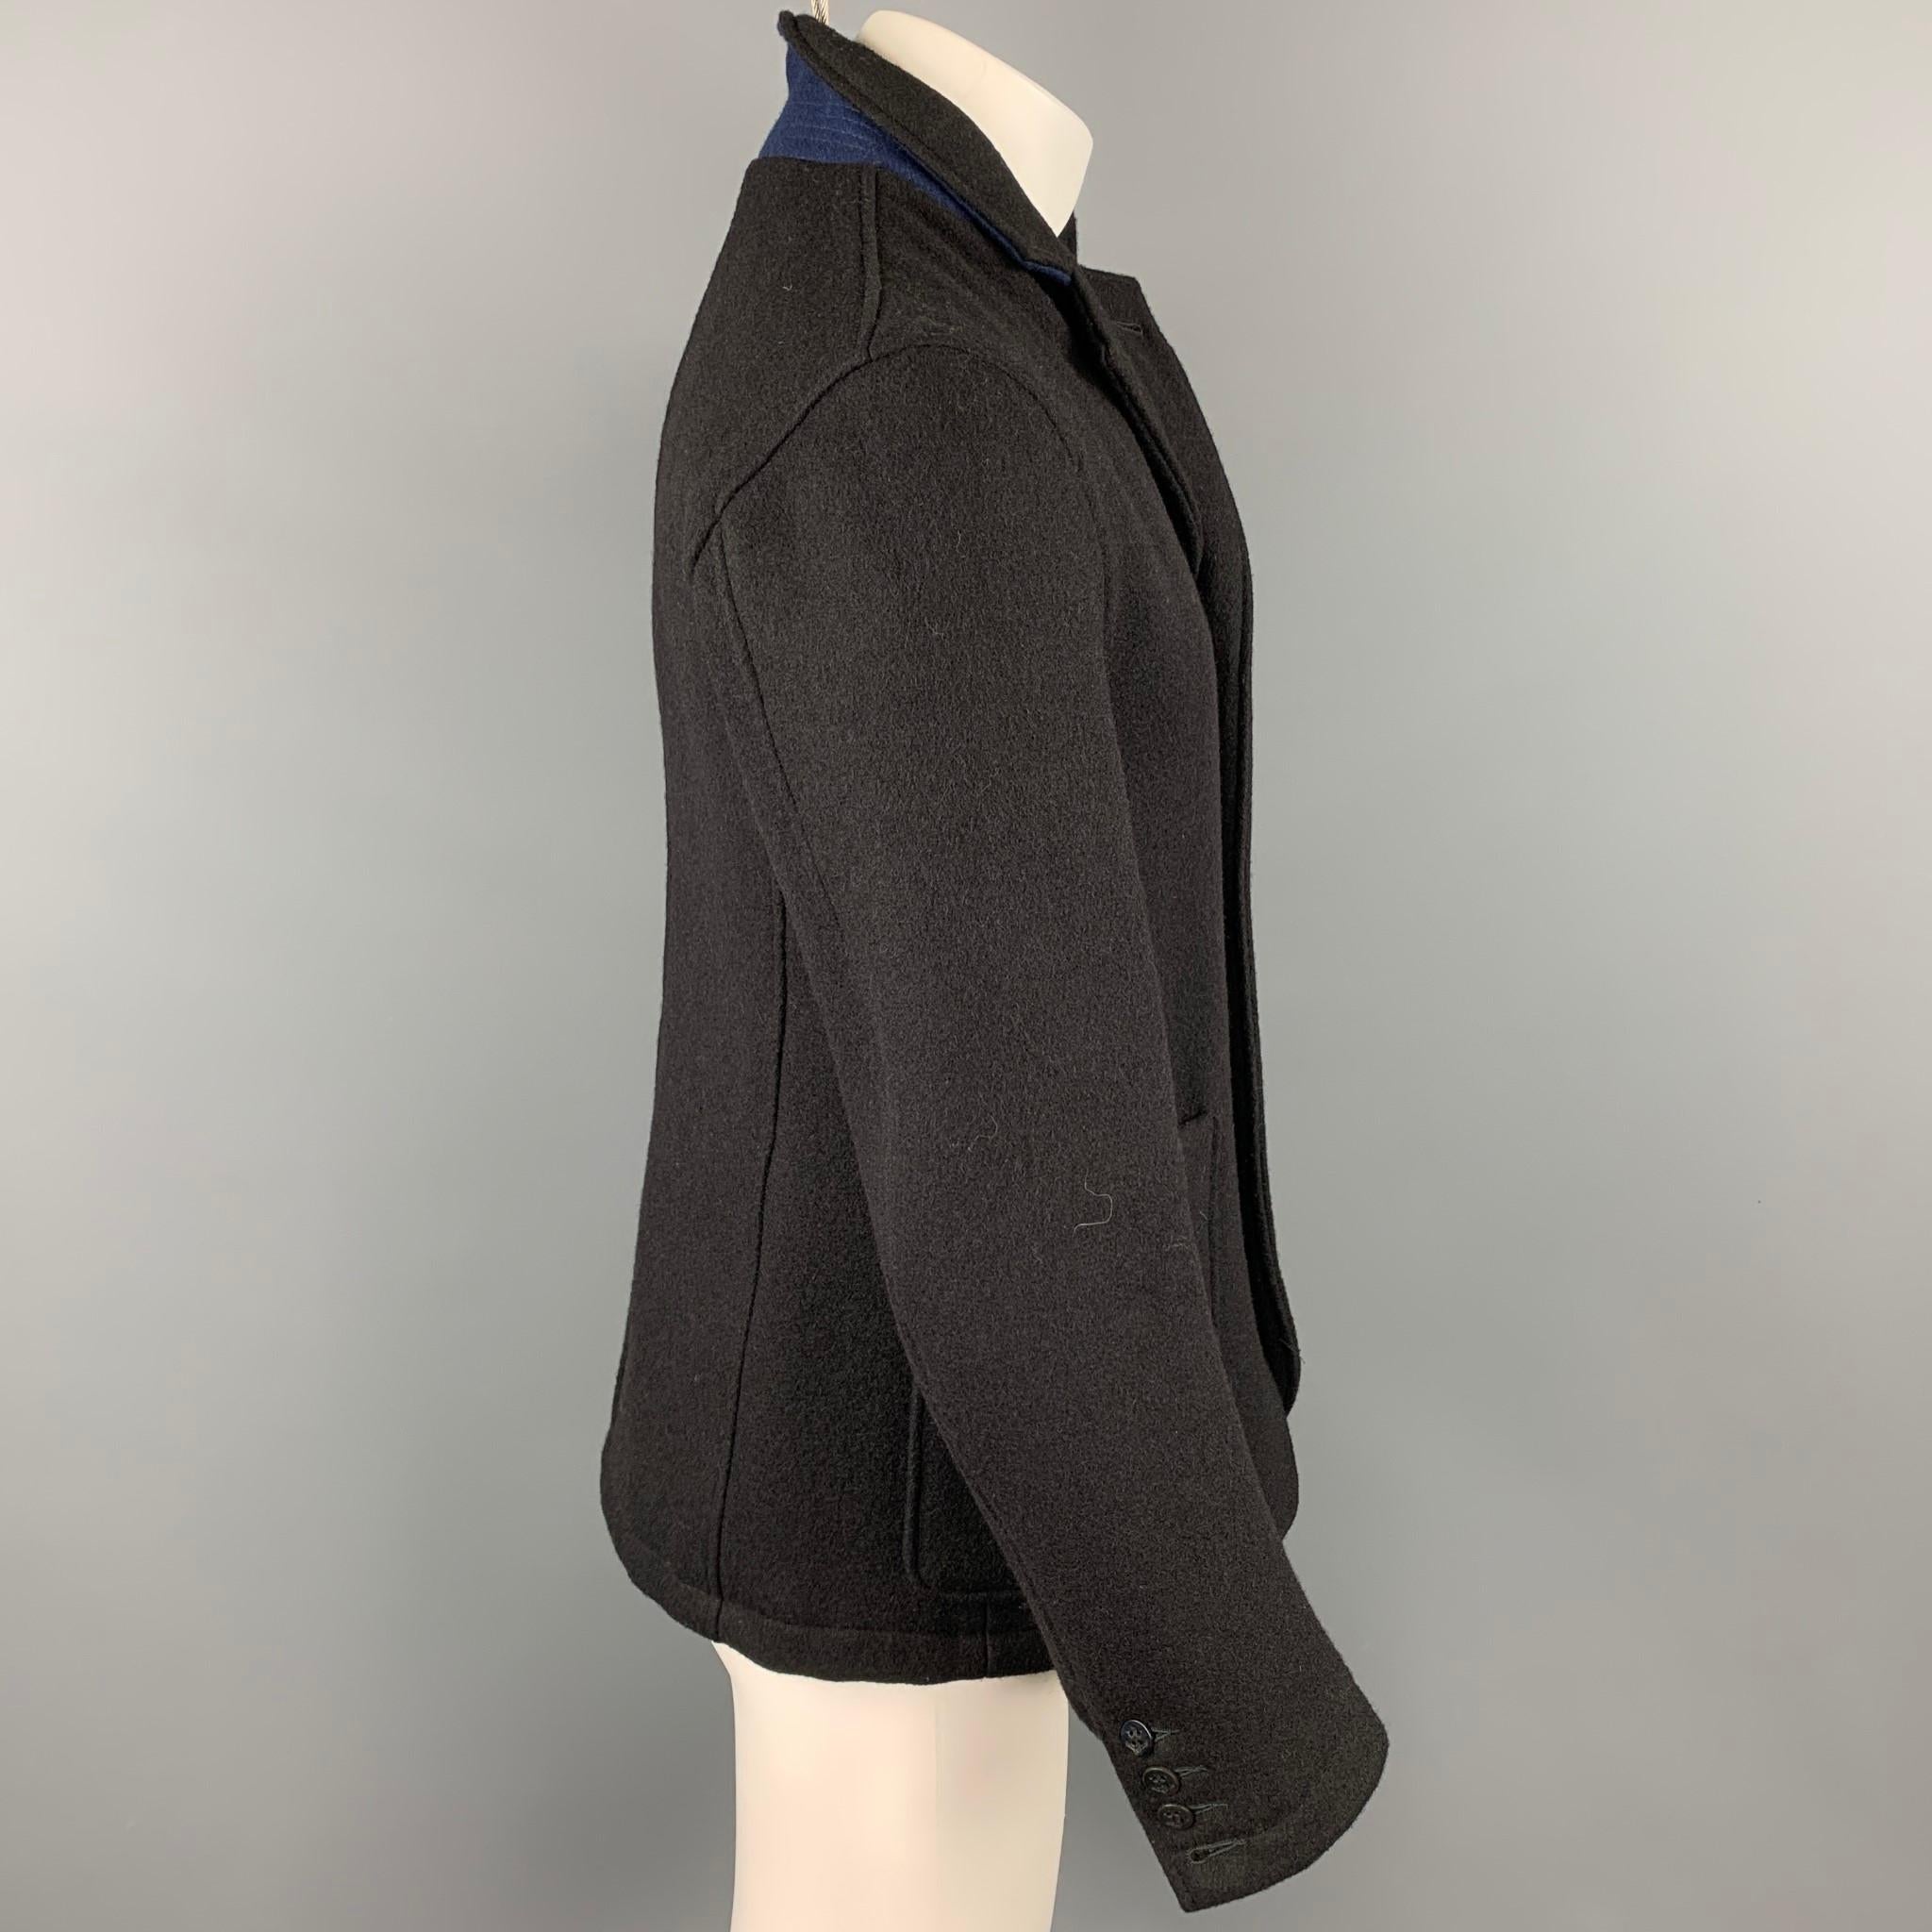 GOLDEN BEAR for UNIONMADE coat comes in a black wool / nylon featuring a strap collar, patch pockets, and a buttoned closure. Made in USA.

Very Good Pre-Owned Condition.
Marked: M

Measurements:

Shoulder: 18 in.
Chest: 39 in.
Sleeve: 25.5